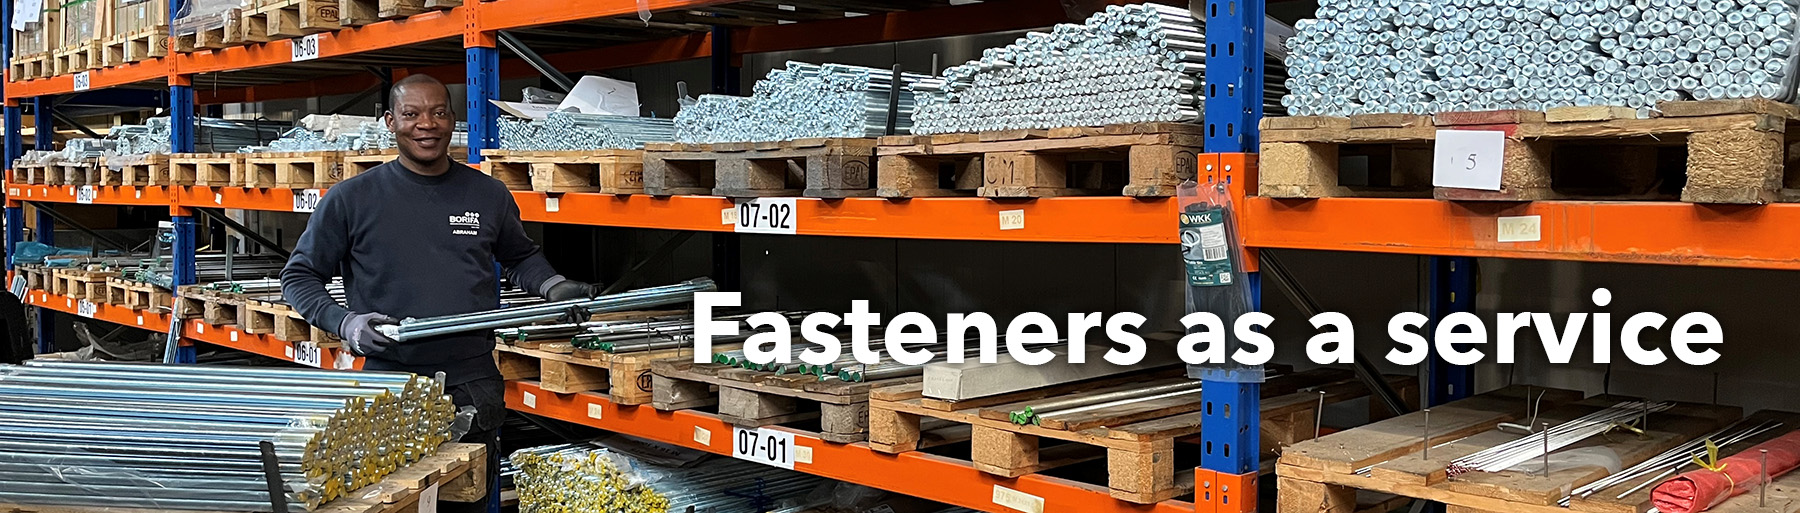 Fasteners as a service